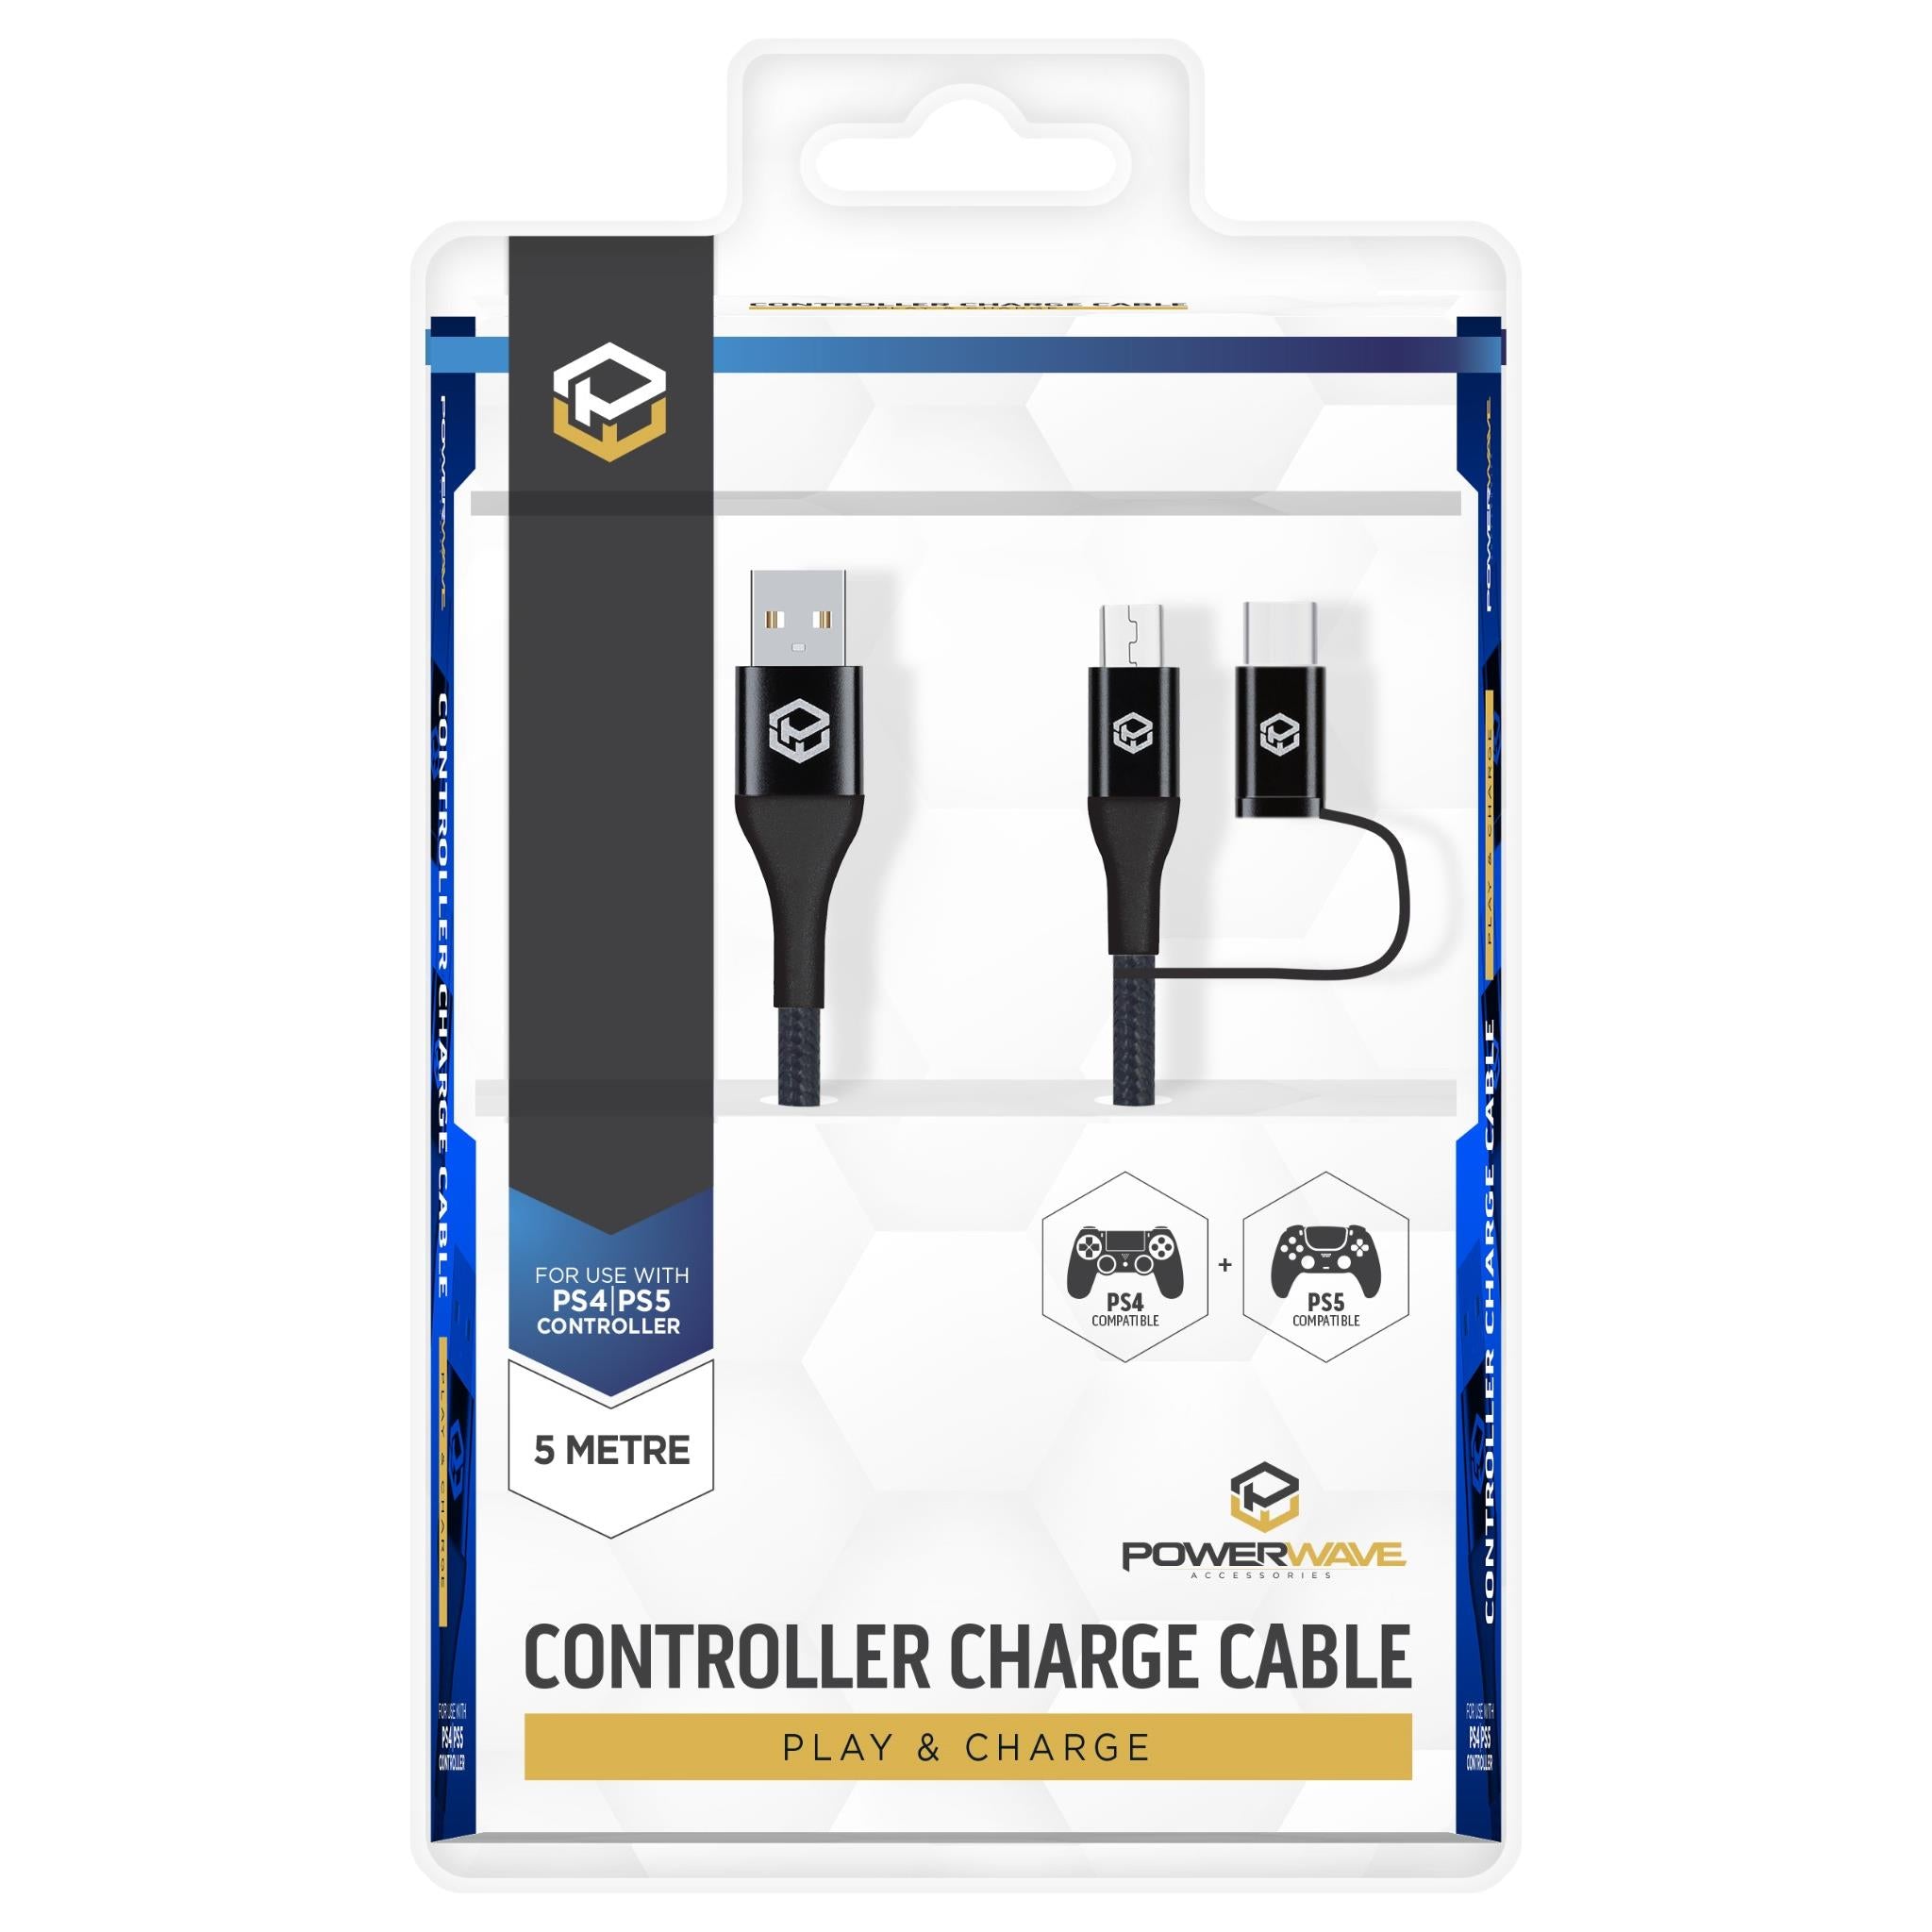 Miniature side vant Powerwave 5m Controller Charge Cable for PlayStation - JB Hi-Fi